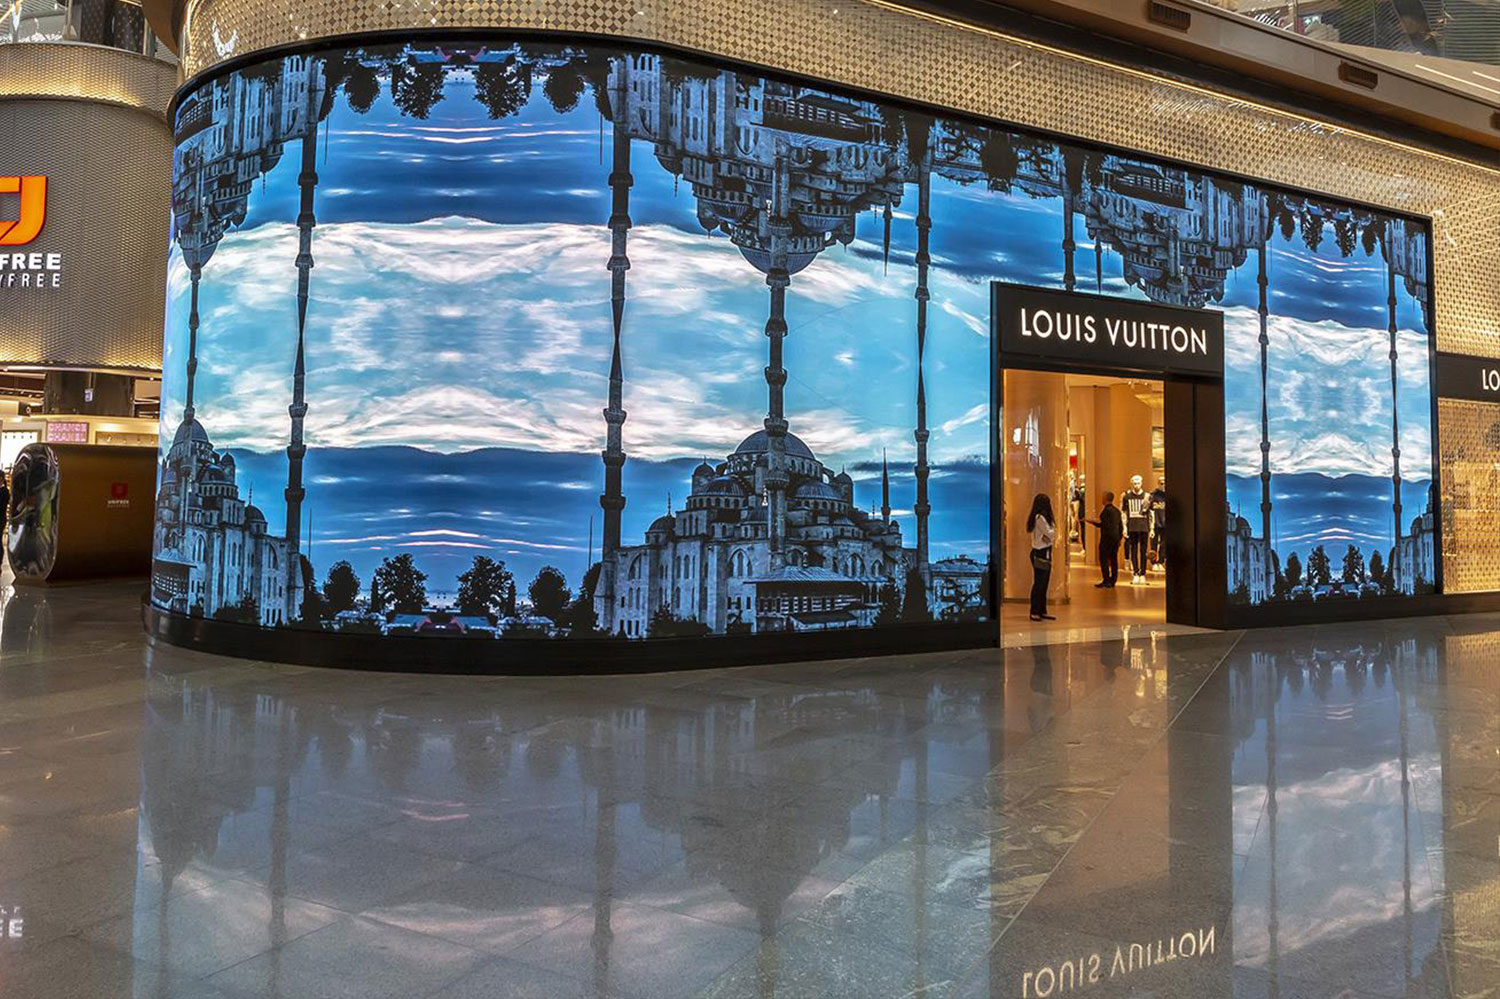 Istanbul Airport / LV Store